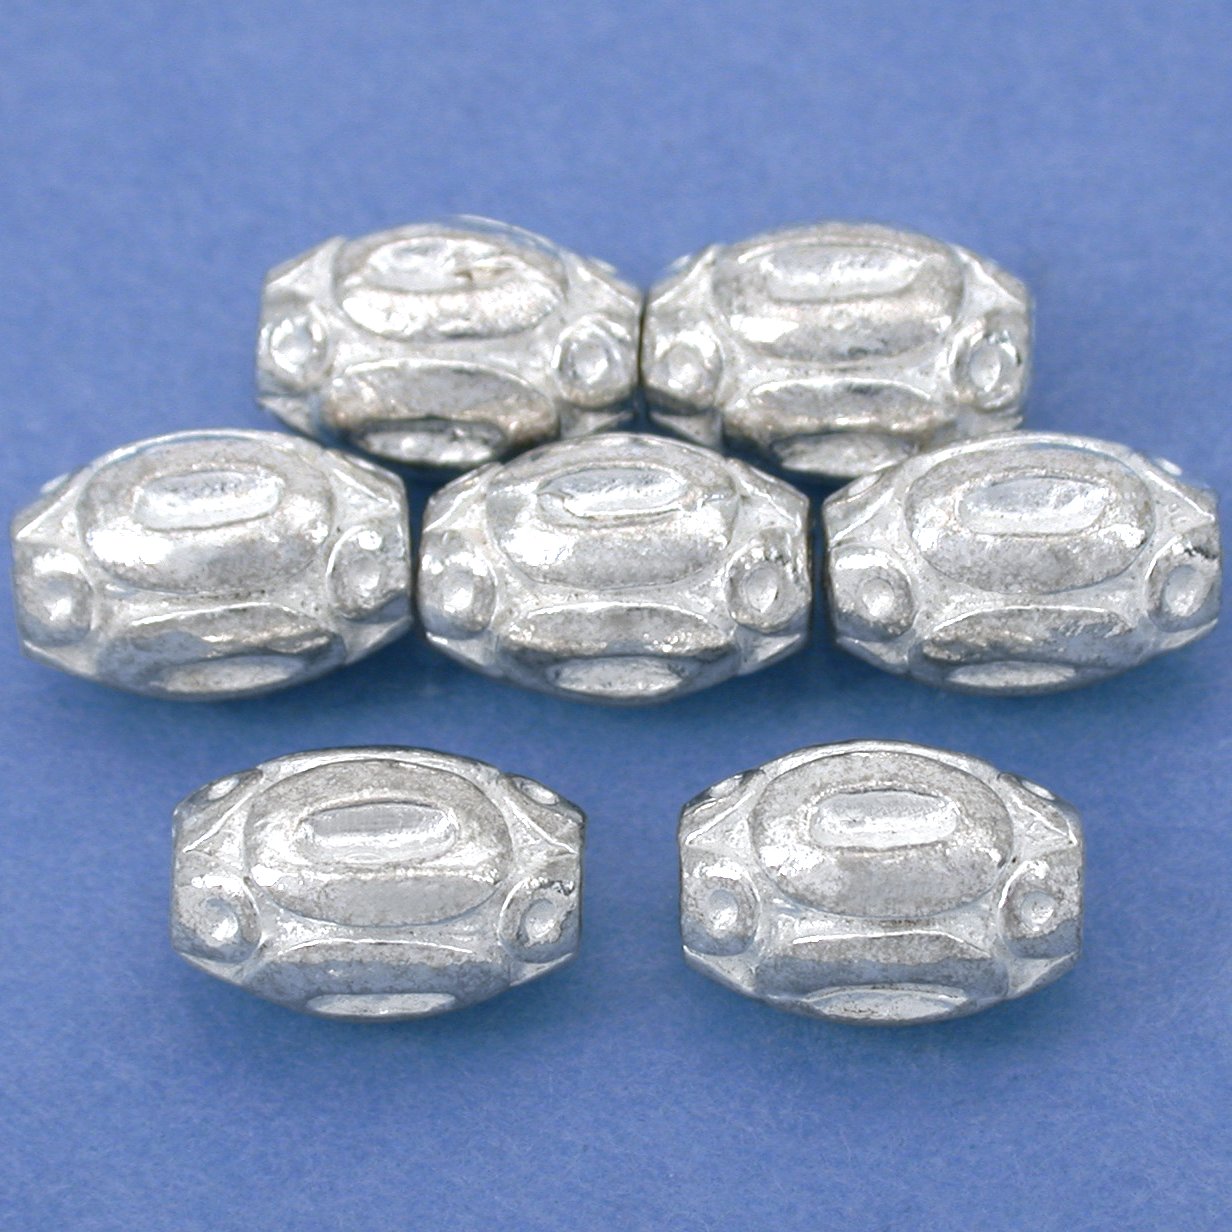 Bali Barrel Silver Plated Beads 11mm 15 Grams 7Pcs Approx.